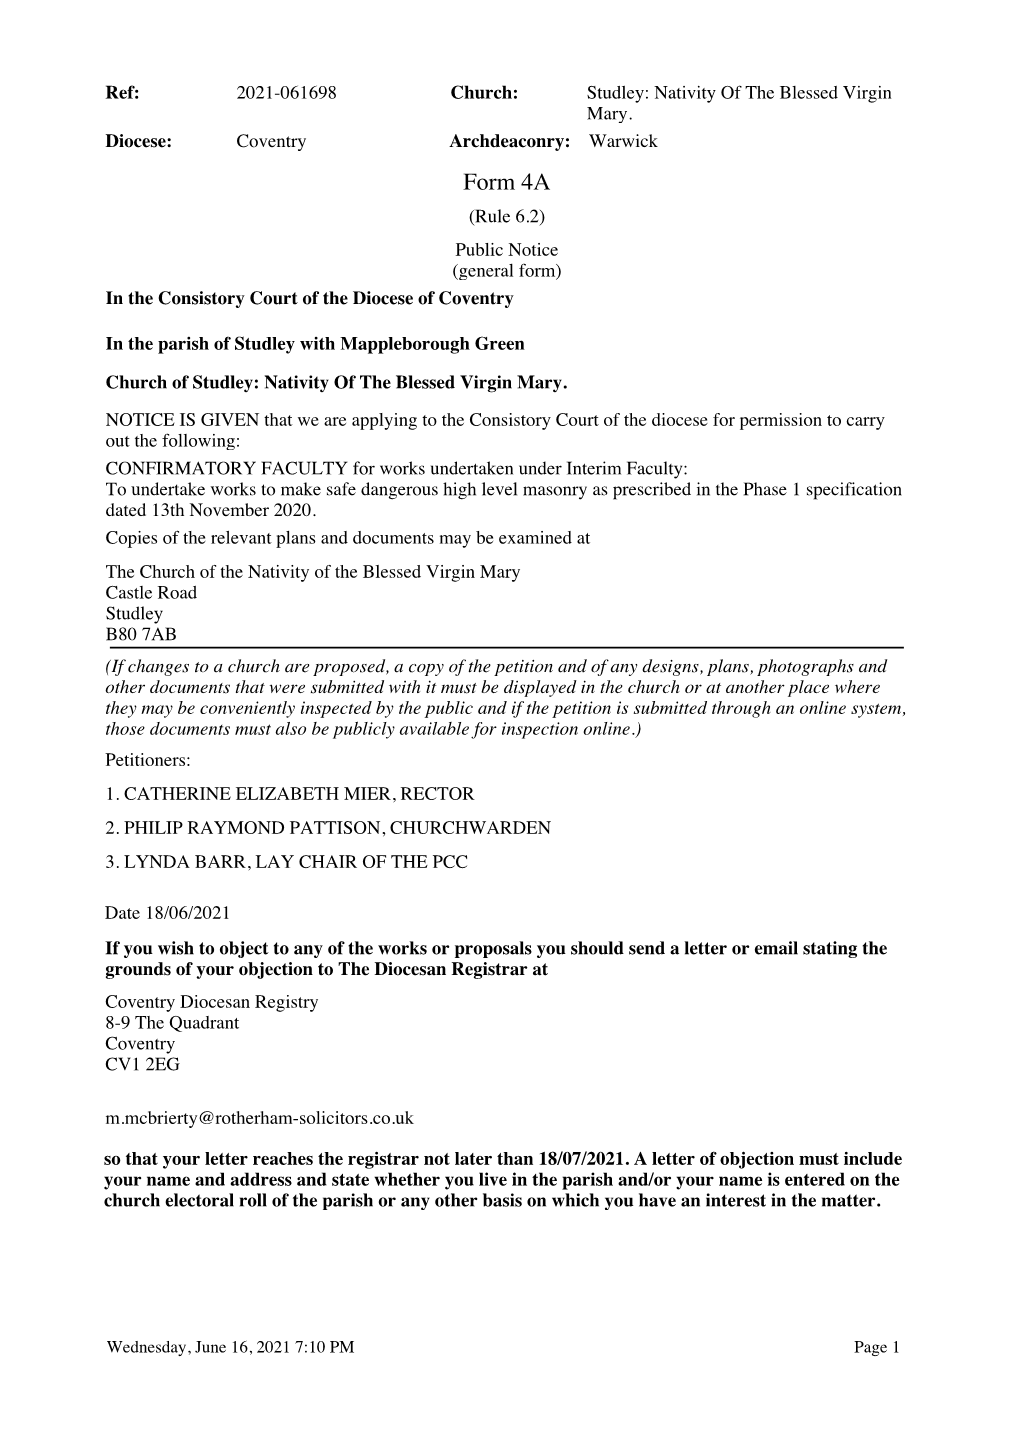 Form 4A (Rule 6.2) Public Notice (General Form) in the Consistory Court of the Diocese of Coventry